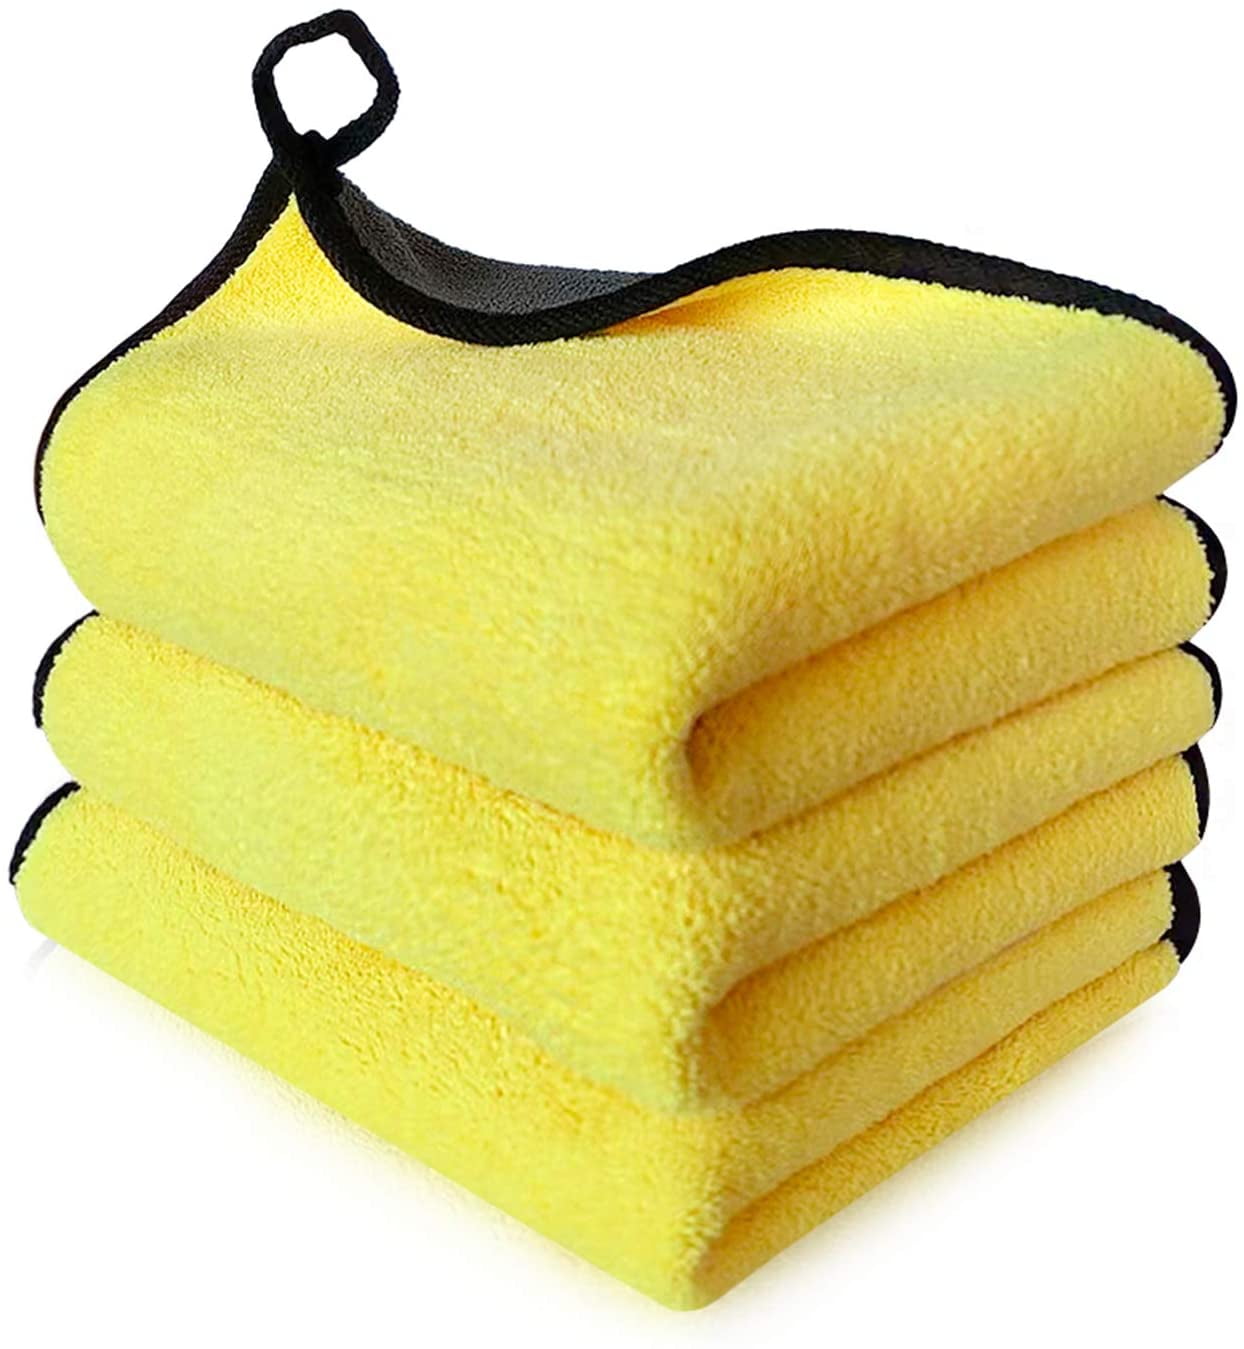 Car Cleaning Towel Washing Cloth Rag Dry Microfiber Ultra Absorbent Soft 